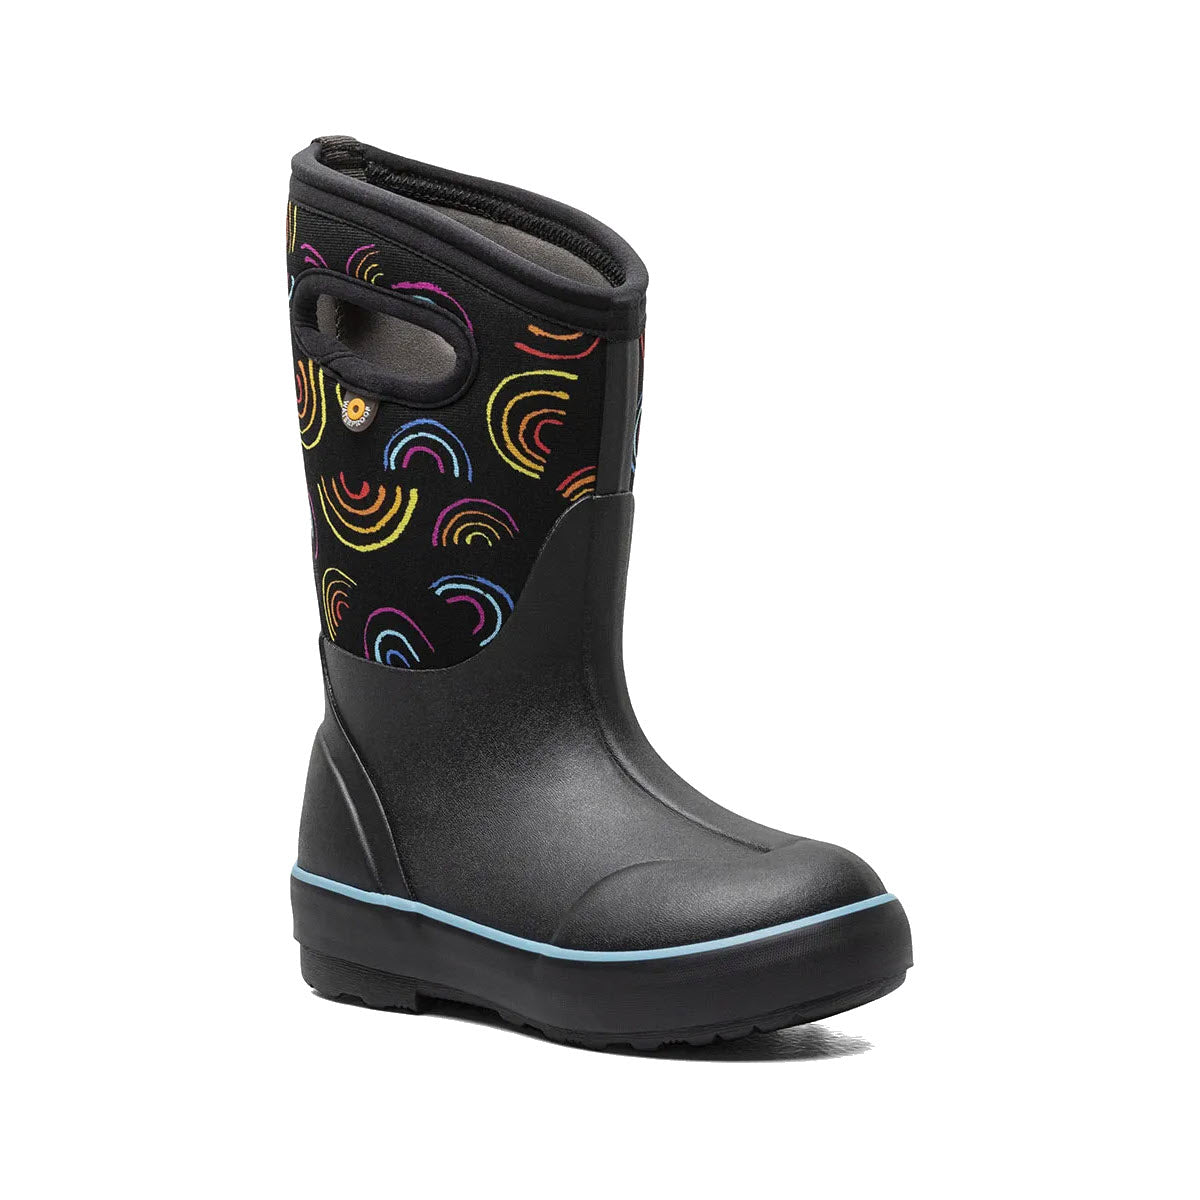 Bogs Black children&#39;s winter boot with a colorful patterned upper and a blue trim on a white background, designed for better traction.